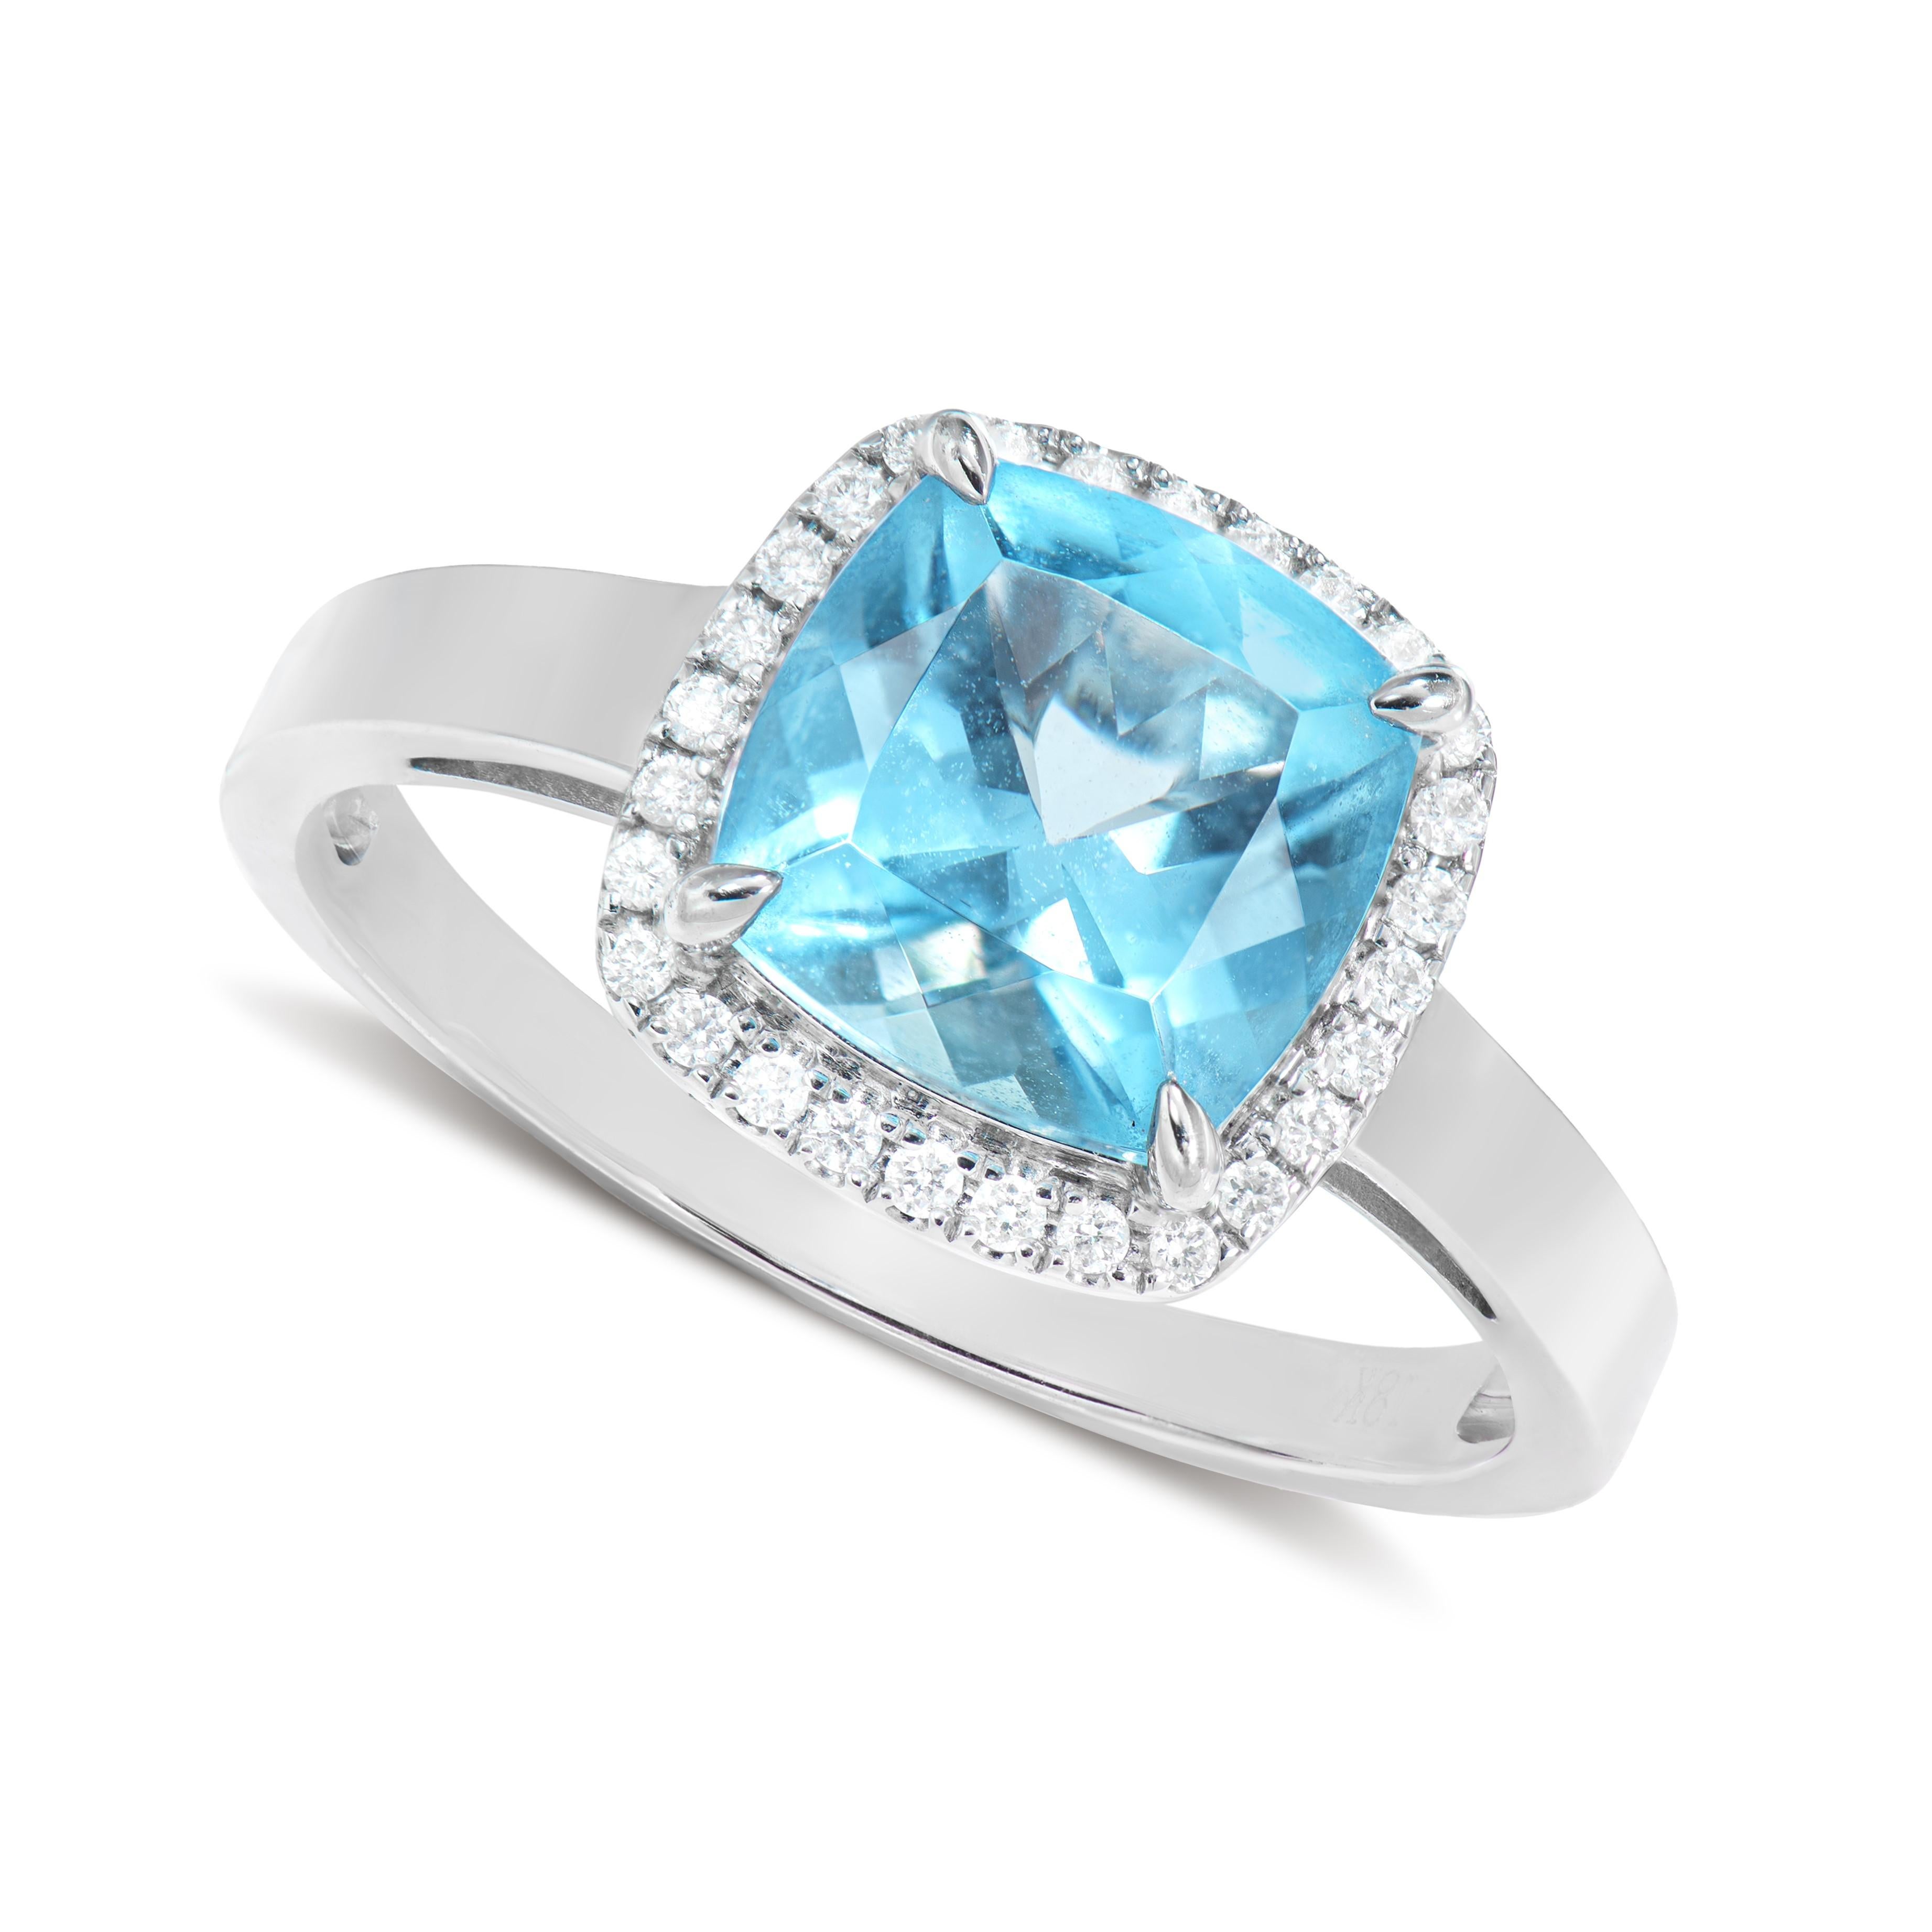 Contemporary 2.51 Carat Sky Blue Topaz Fancy Ring in 18Karat White Gold with White Diamond. For Sale